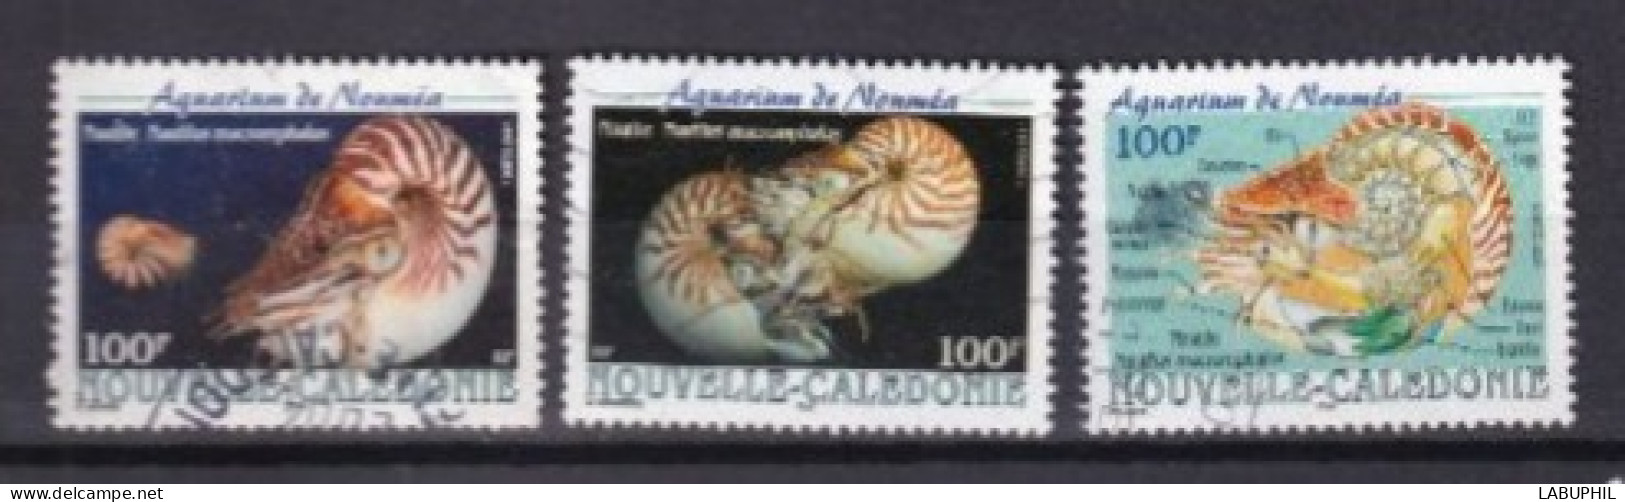 NOUVELLE CALEDONIE Dispersion D'une Collection Oblitéré Used 2001 Coquillages - Used Stamps